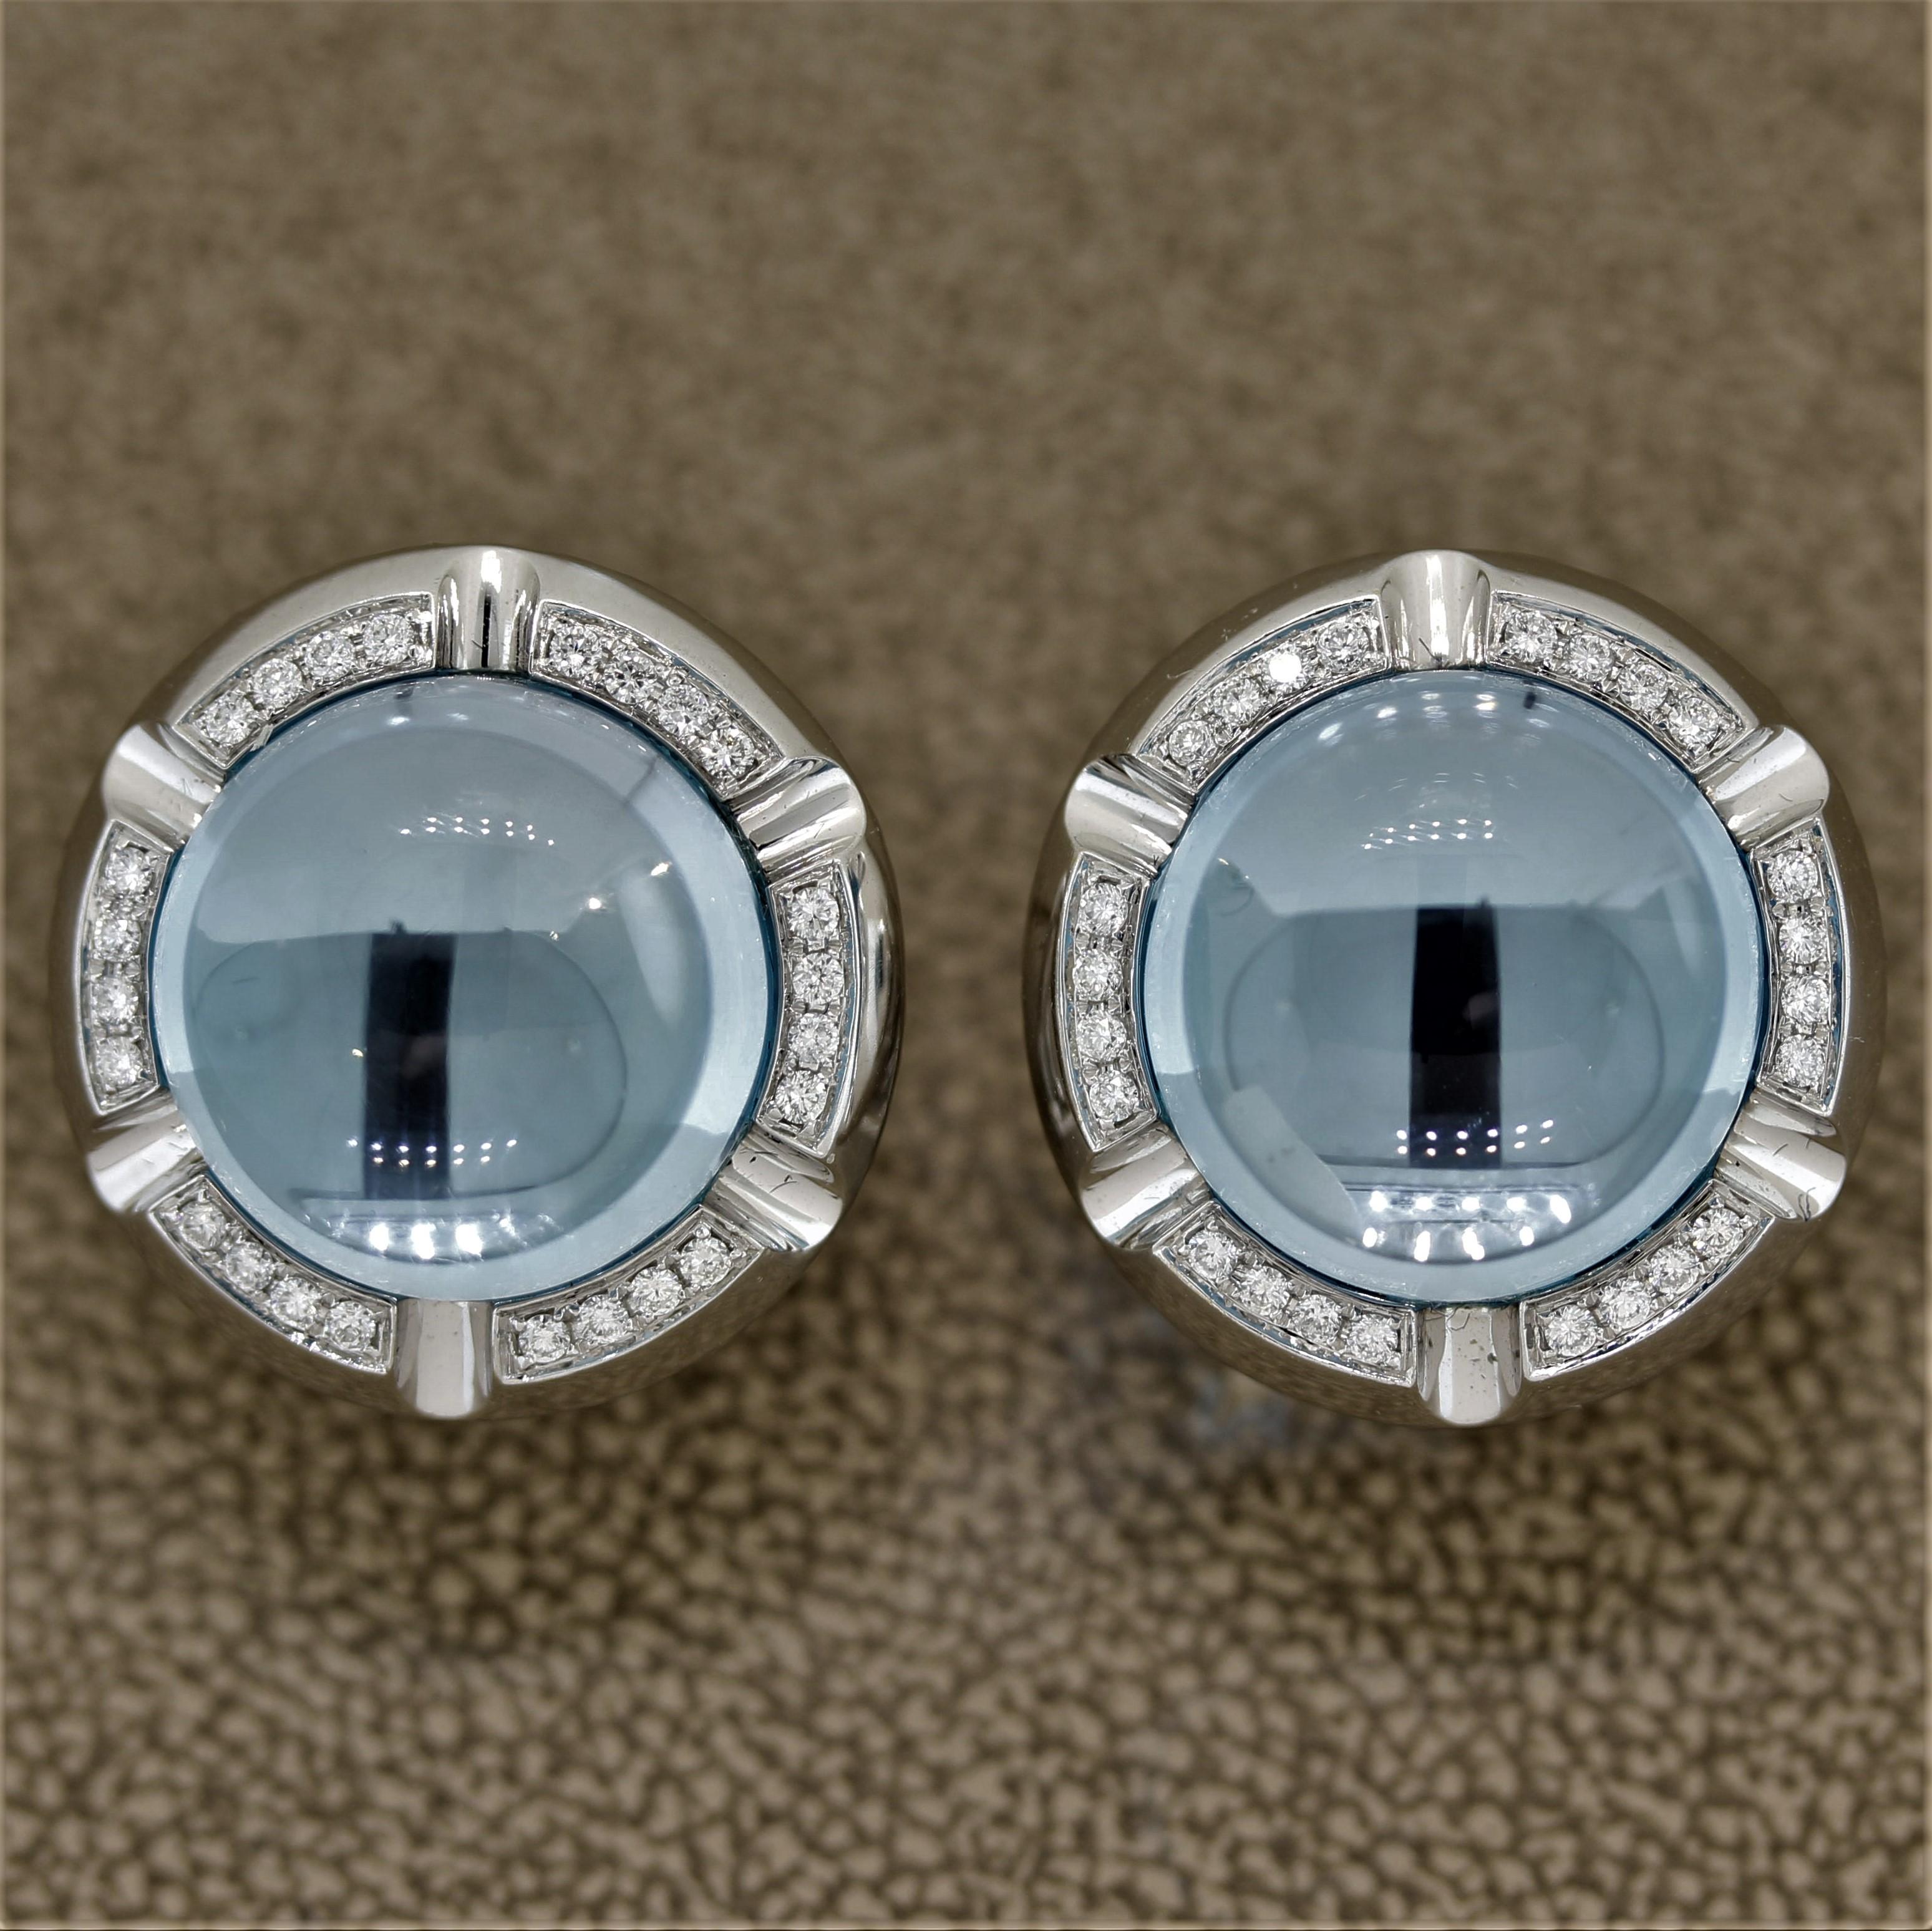 A modern take on the classic button earrings. They feature 24.70 carats of fine blue topaz which match perfectly in color, size, and shape. They are accented by 0.62 carats of round brilliant cut diamonds which are set around the topaz. Made in 18k